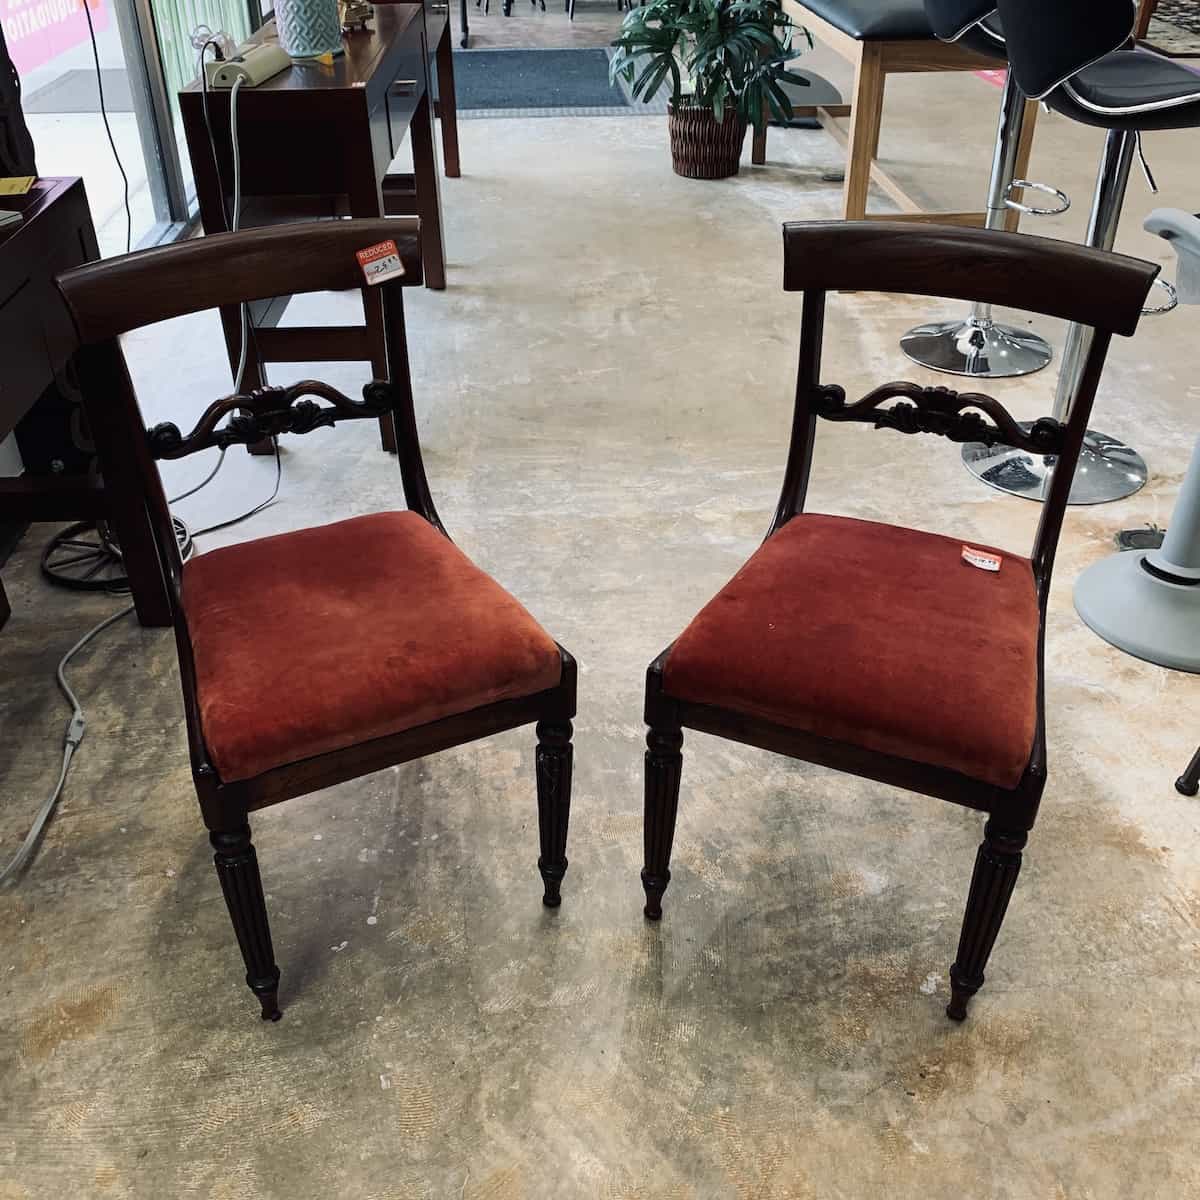 Antique-scroll-chairs-front